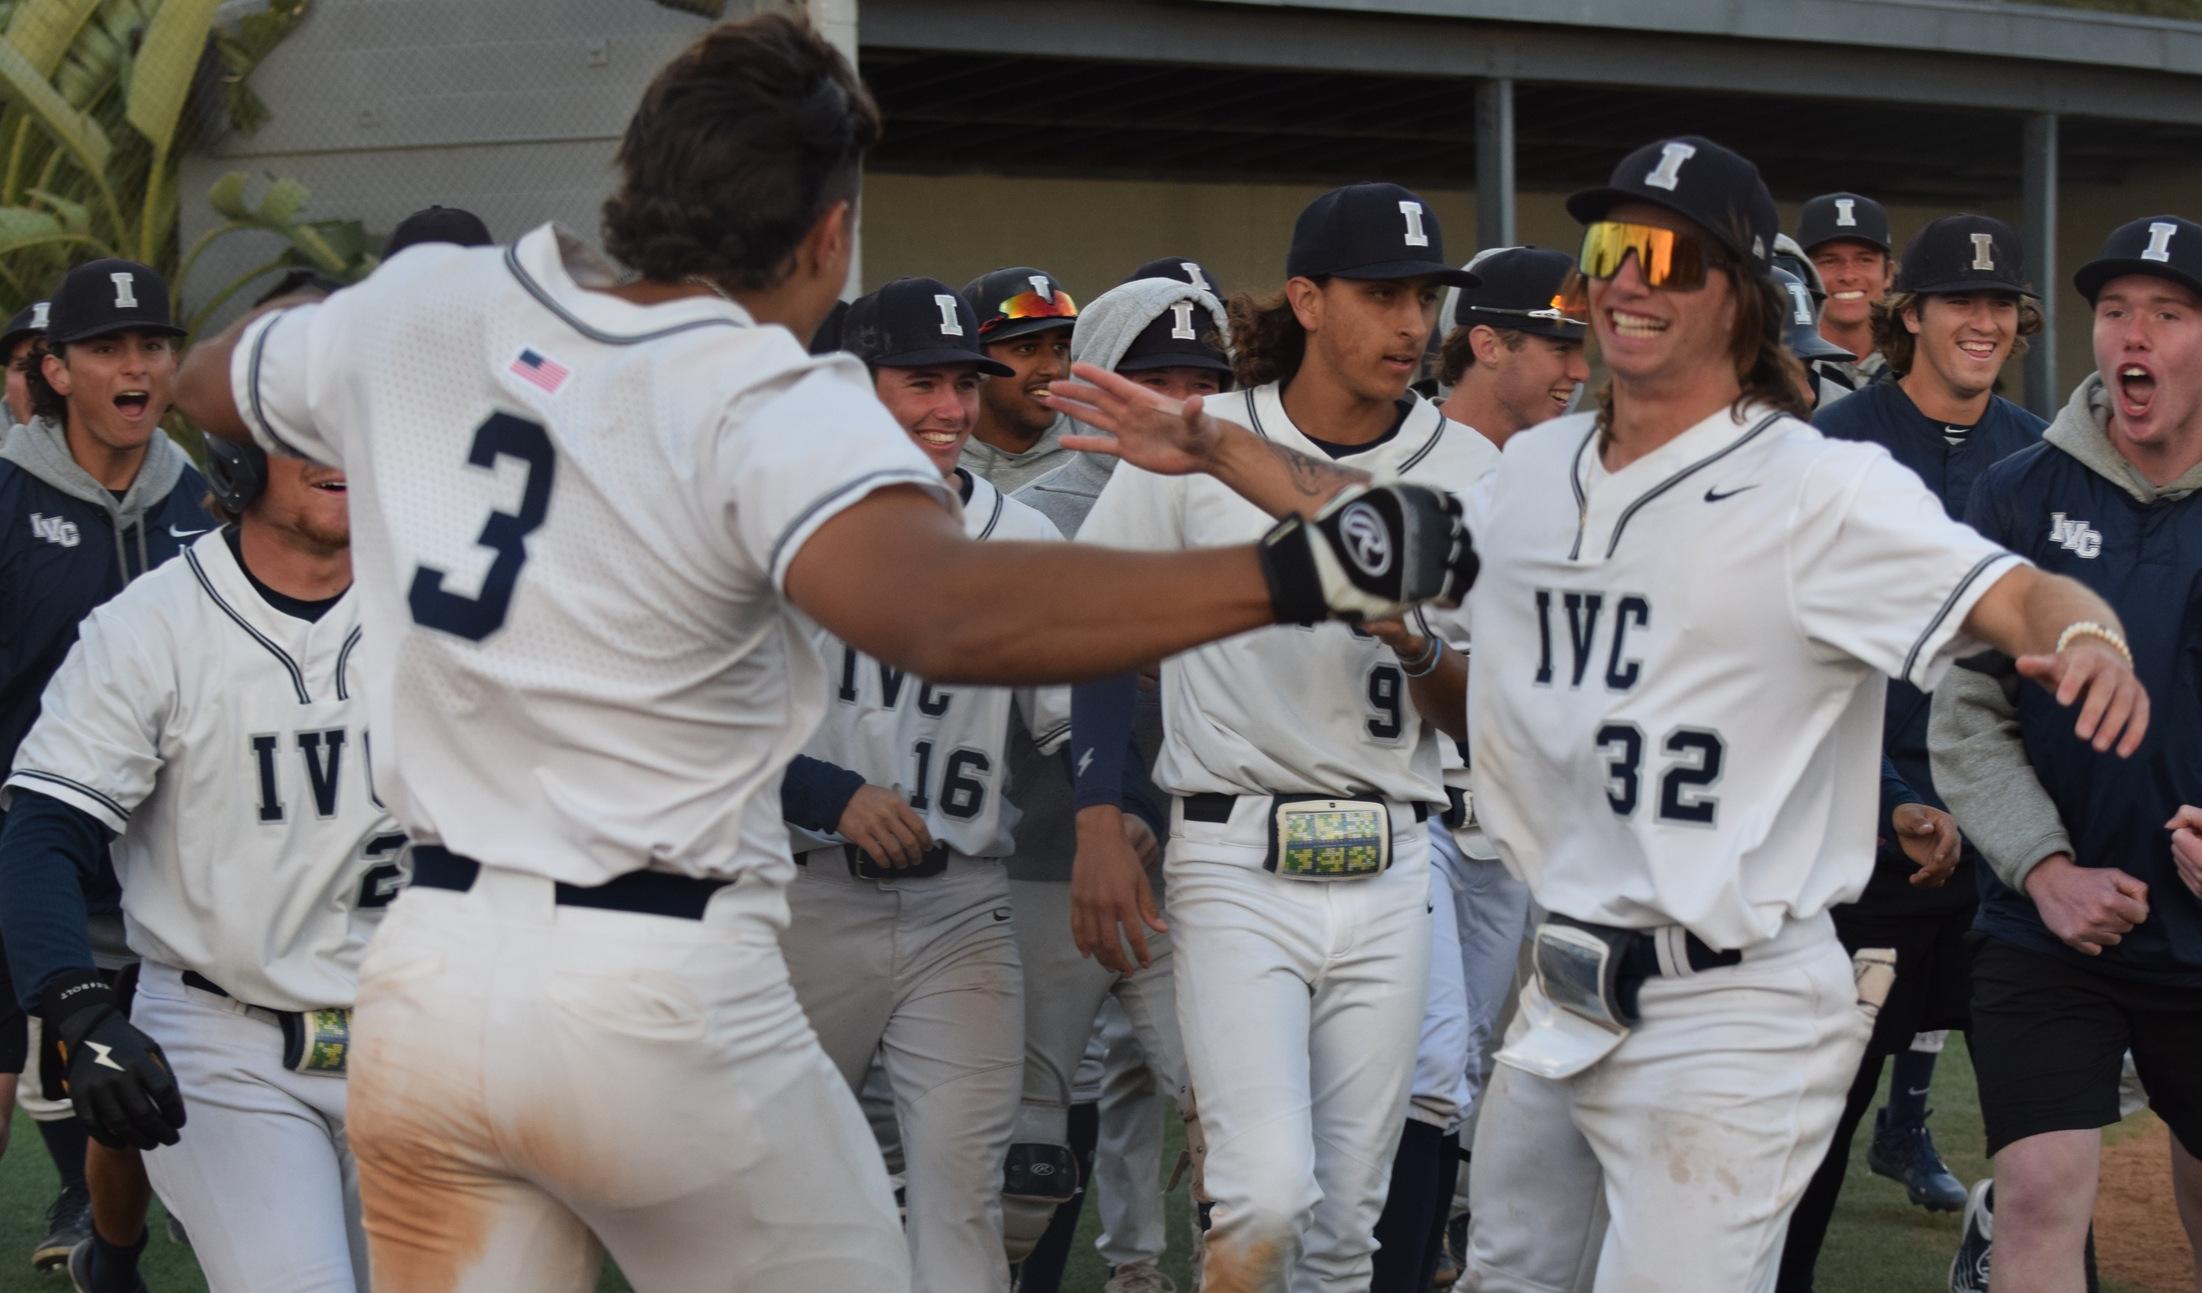 Kevin James walks it off for the Irvine Valley baseball team